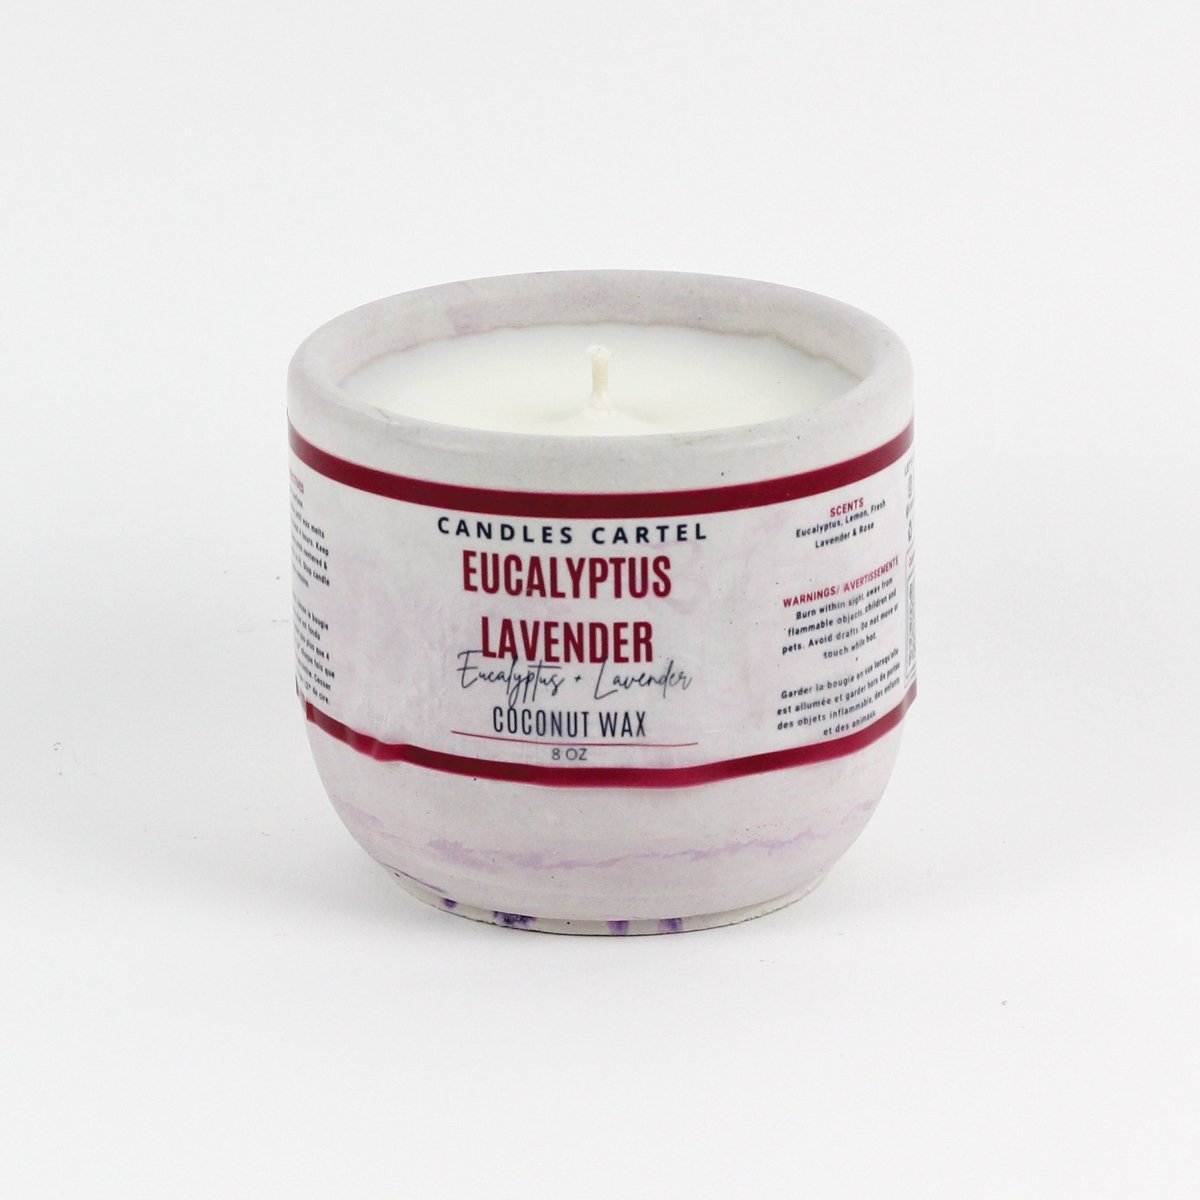 Eucalyptus and Lavender Candle